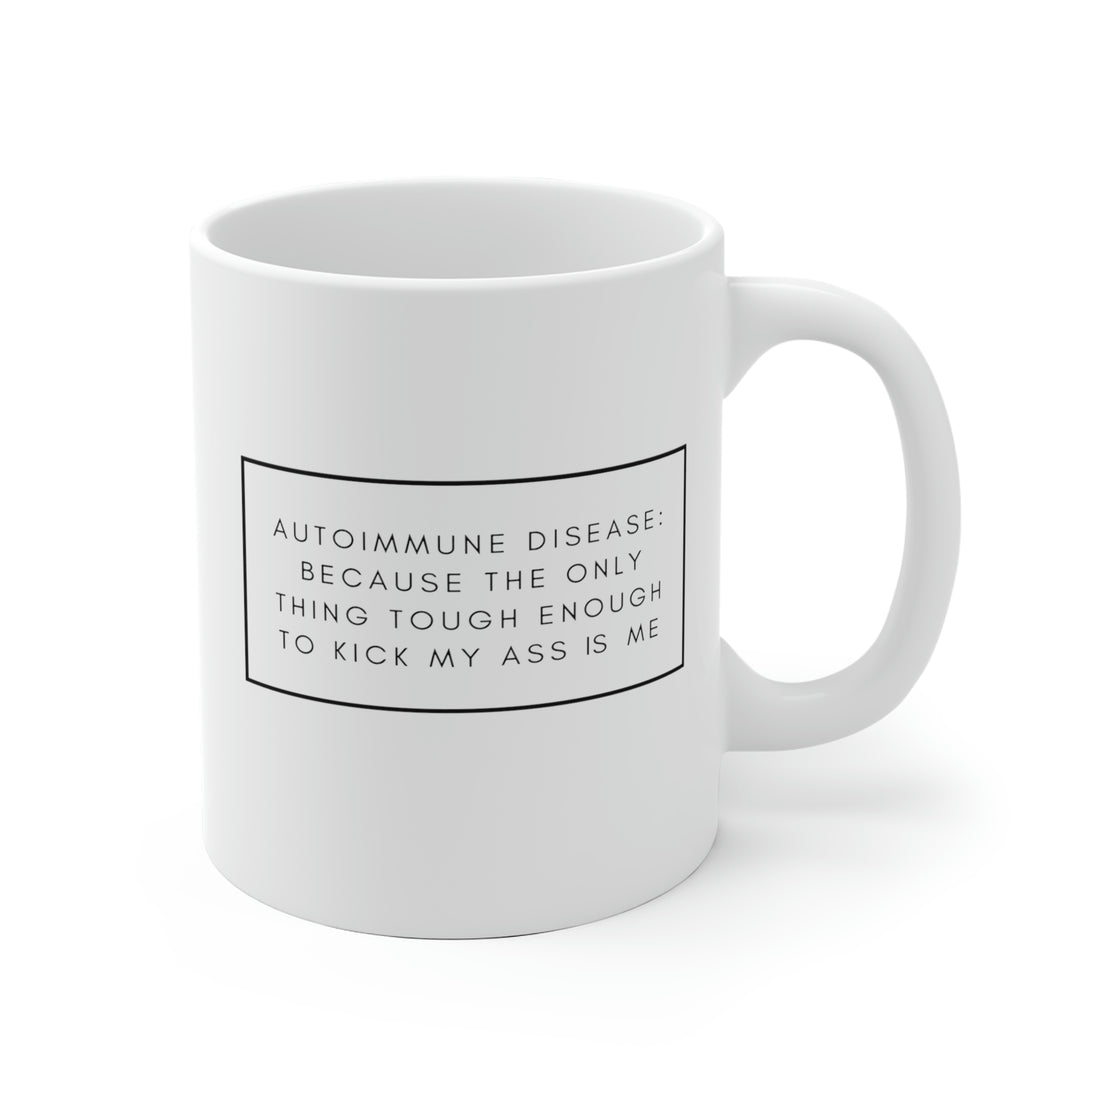 Autoimmune Disease Because The Only Thing Tough Enough To Kick My Ass Is Me - White Ceramic Mug 2 sizes Available